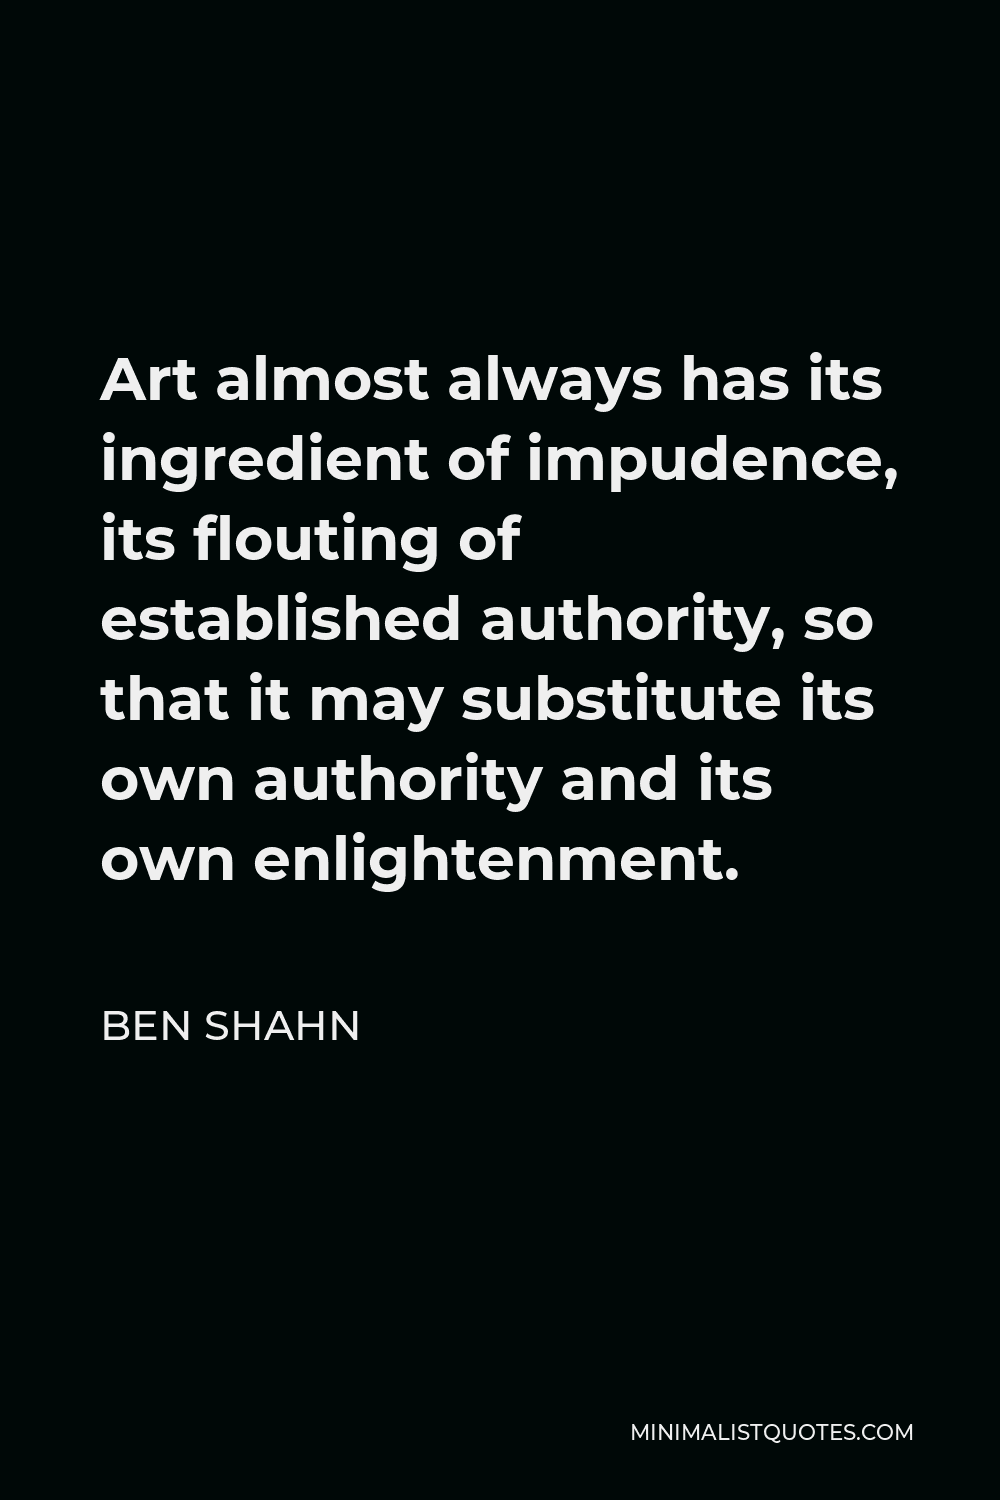 Ben Shahn Quote - Art almost always has its ingredient of impudence, its flouting of established authority, so that it may substitute its own authority and its own enlightenment.